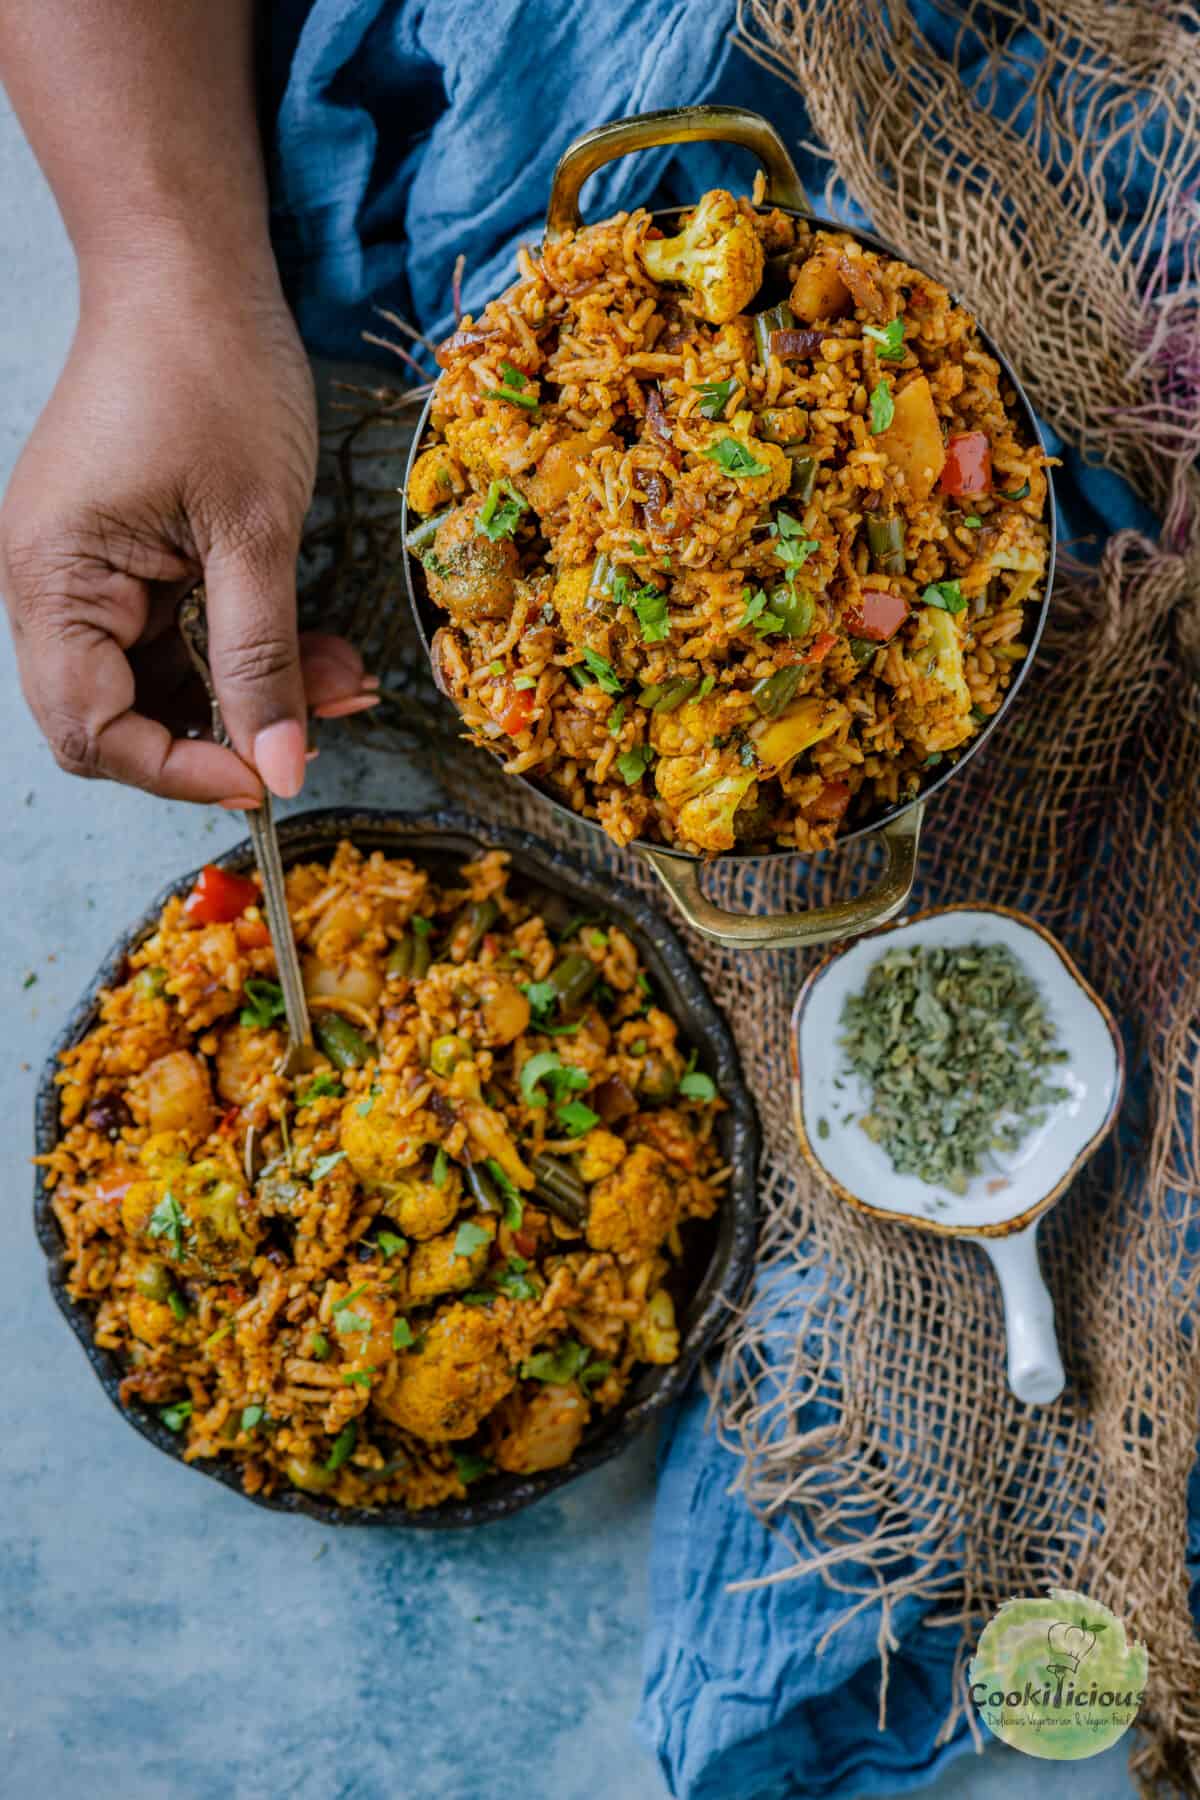 2 bowls of vegan tawa pulao and one hand is digging into one of the bowls with a spoon.